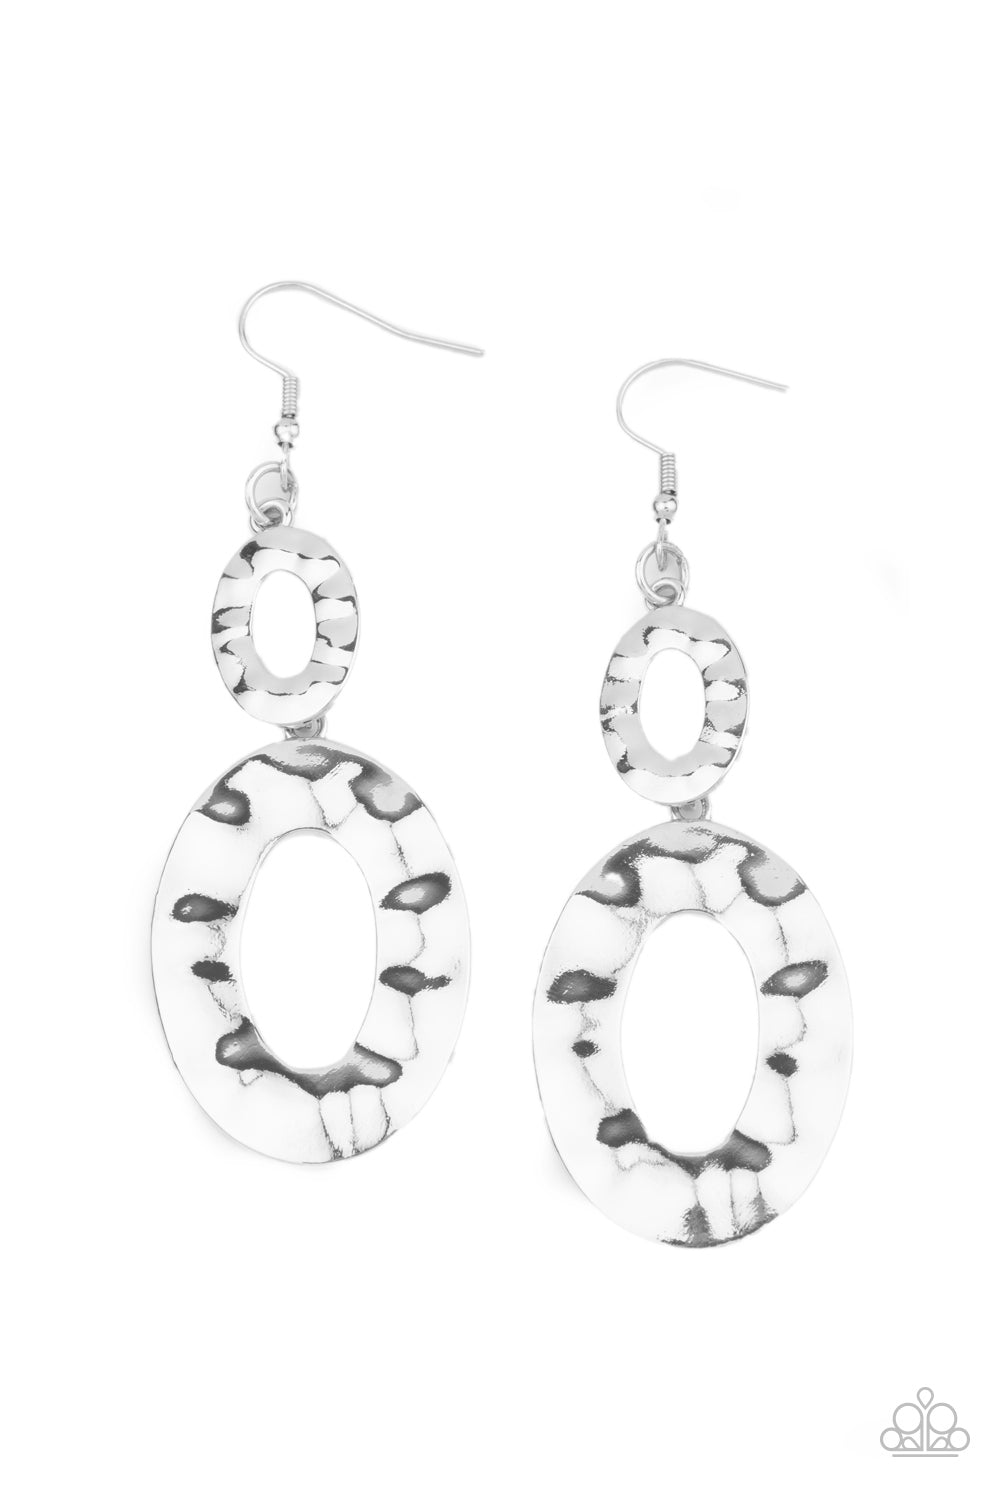 Bring On The Basics - Silver  Earrings - Paparazzi Accessories - Paparazzi Accessories 